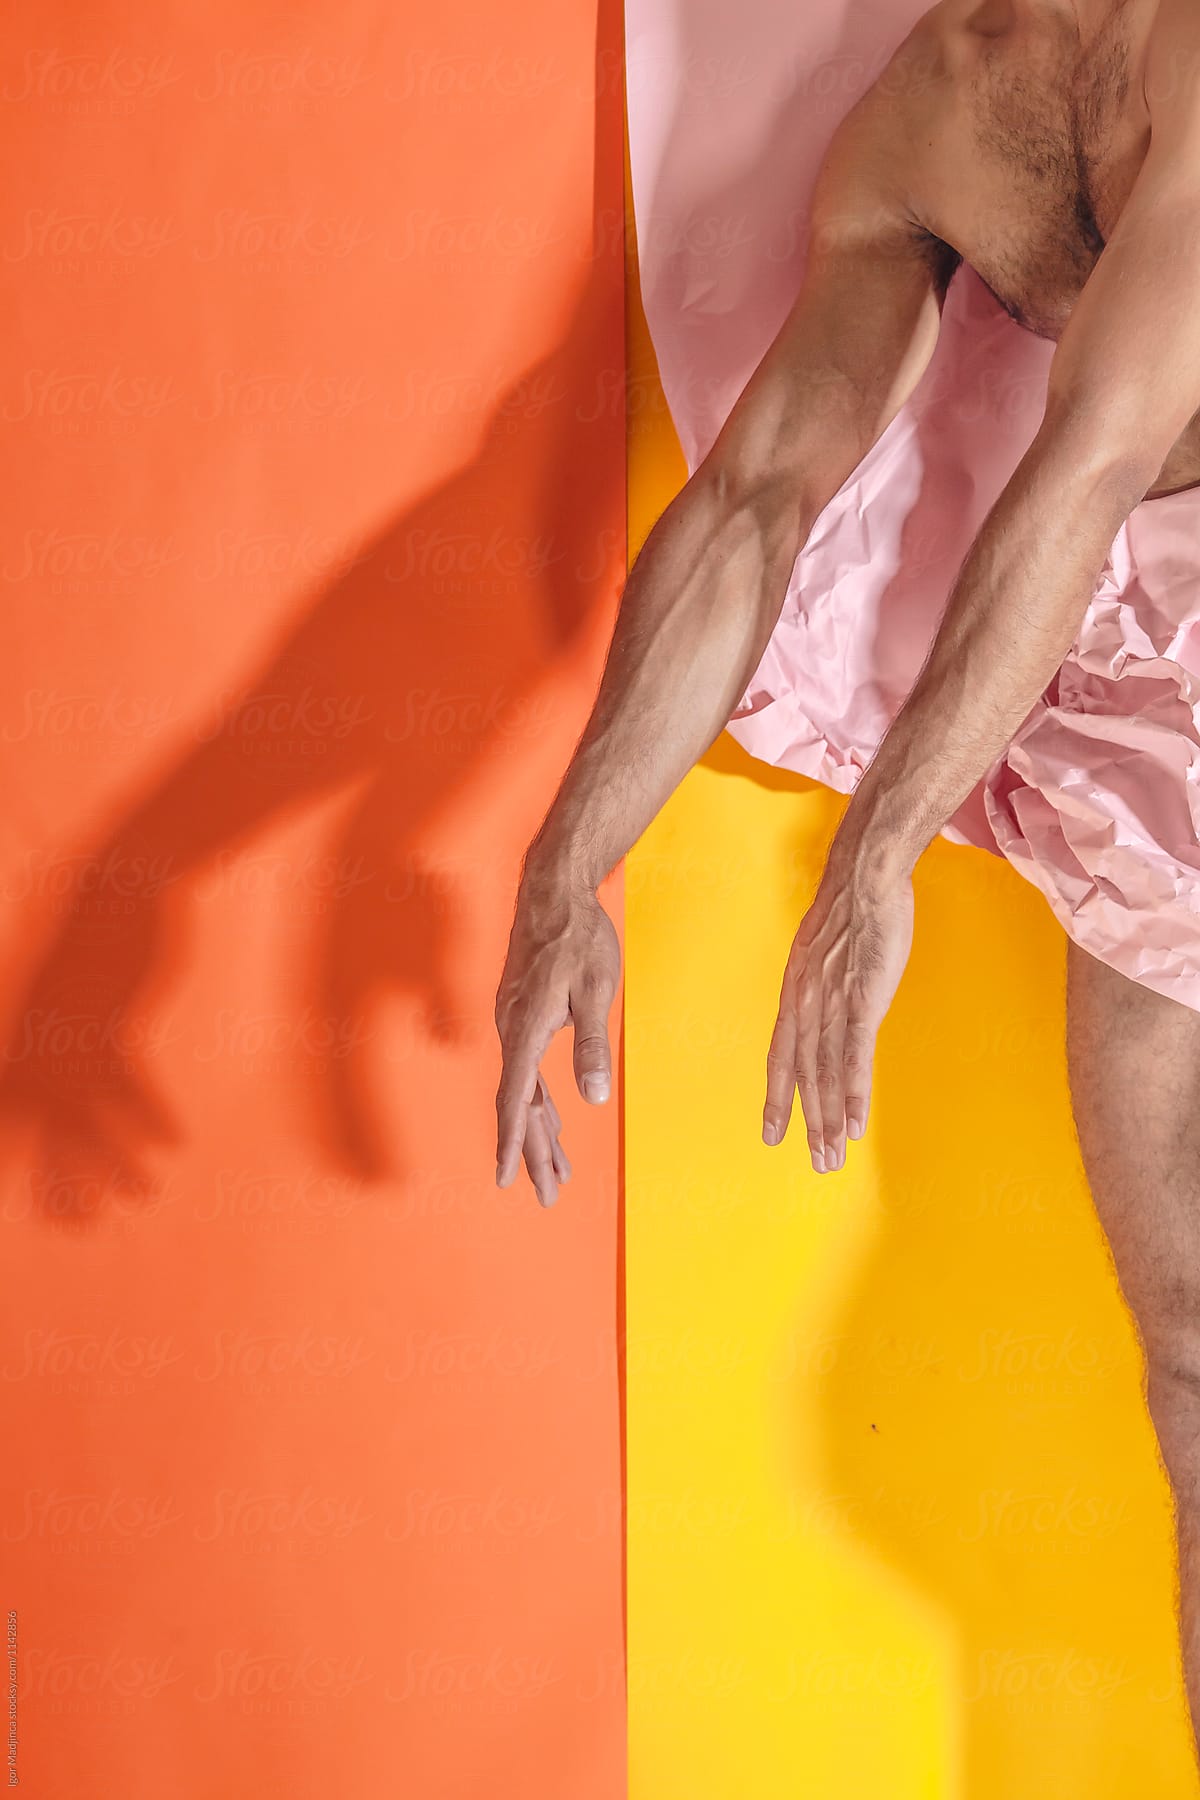 BODY,ART,ABSTRACT,COLORFUL,SHADOW,DANCE,GAY,